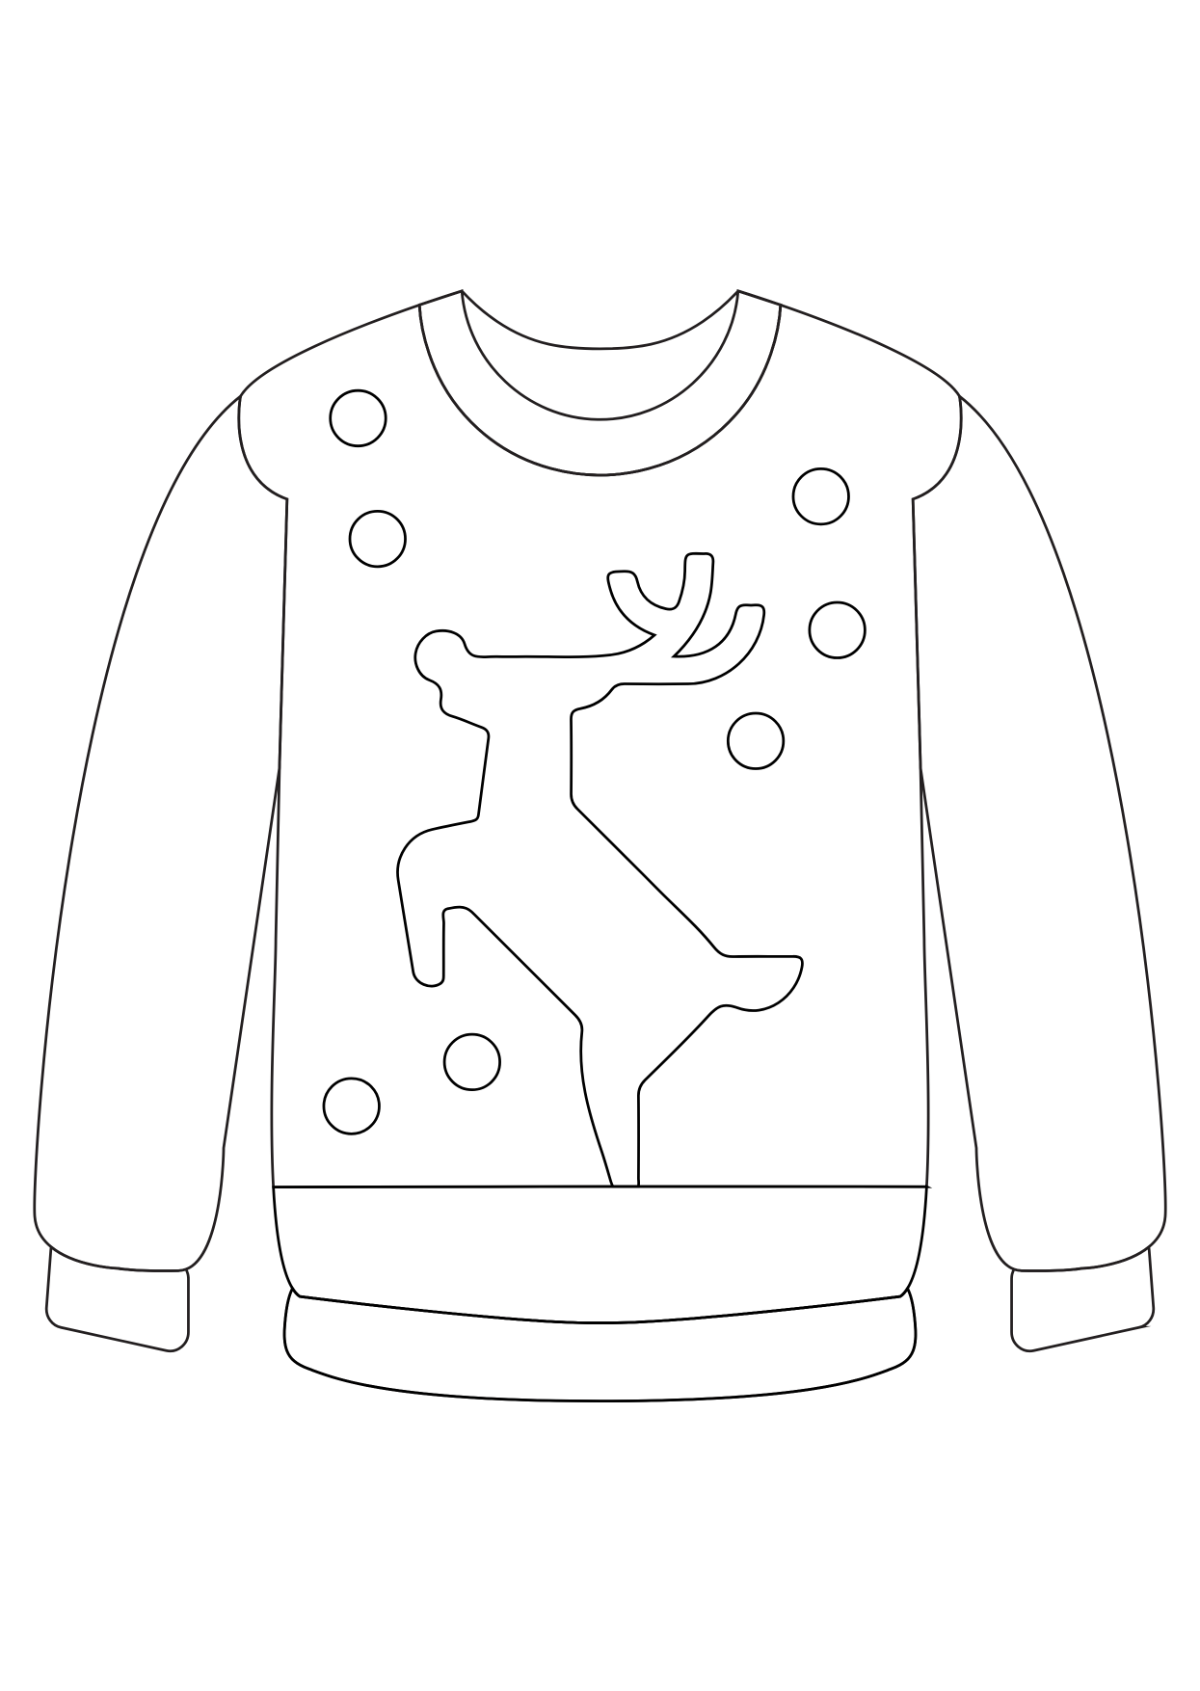 FREE Ugly Sweater Templates & Examples - Edit Online & Download ...